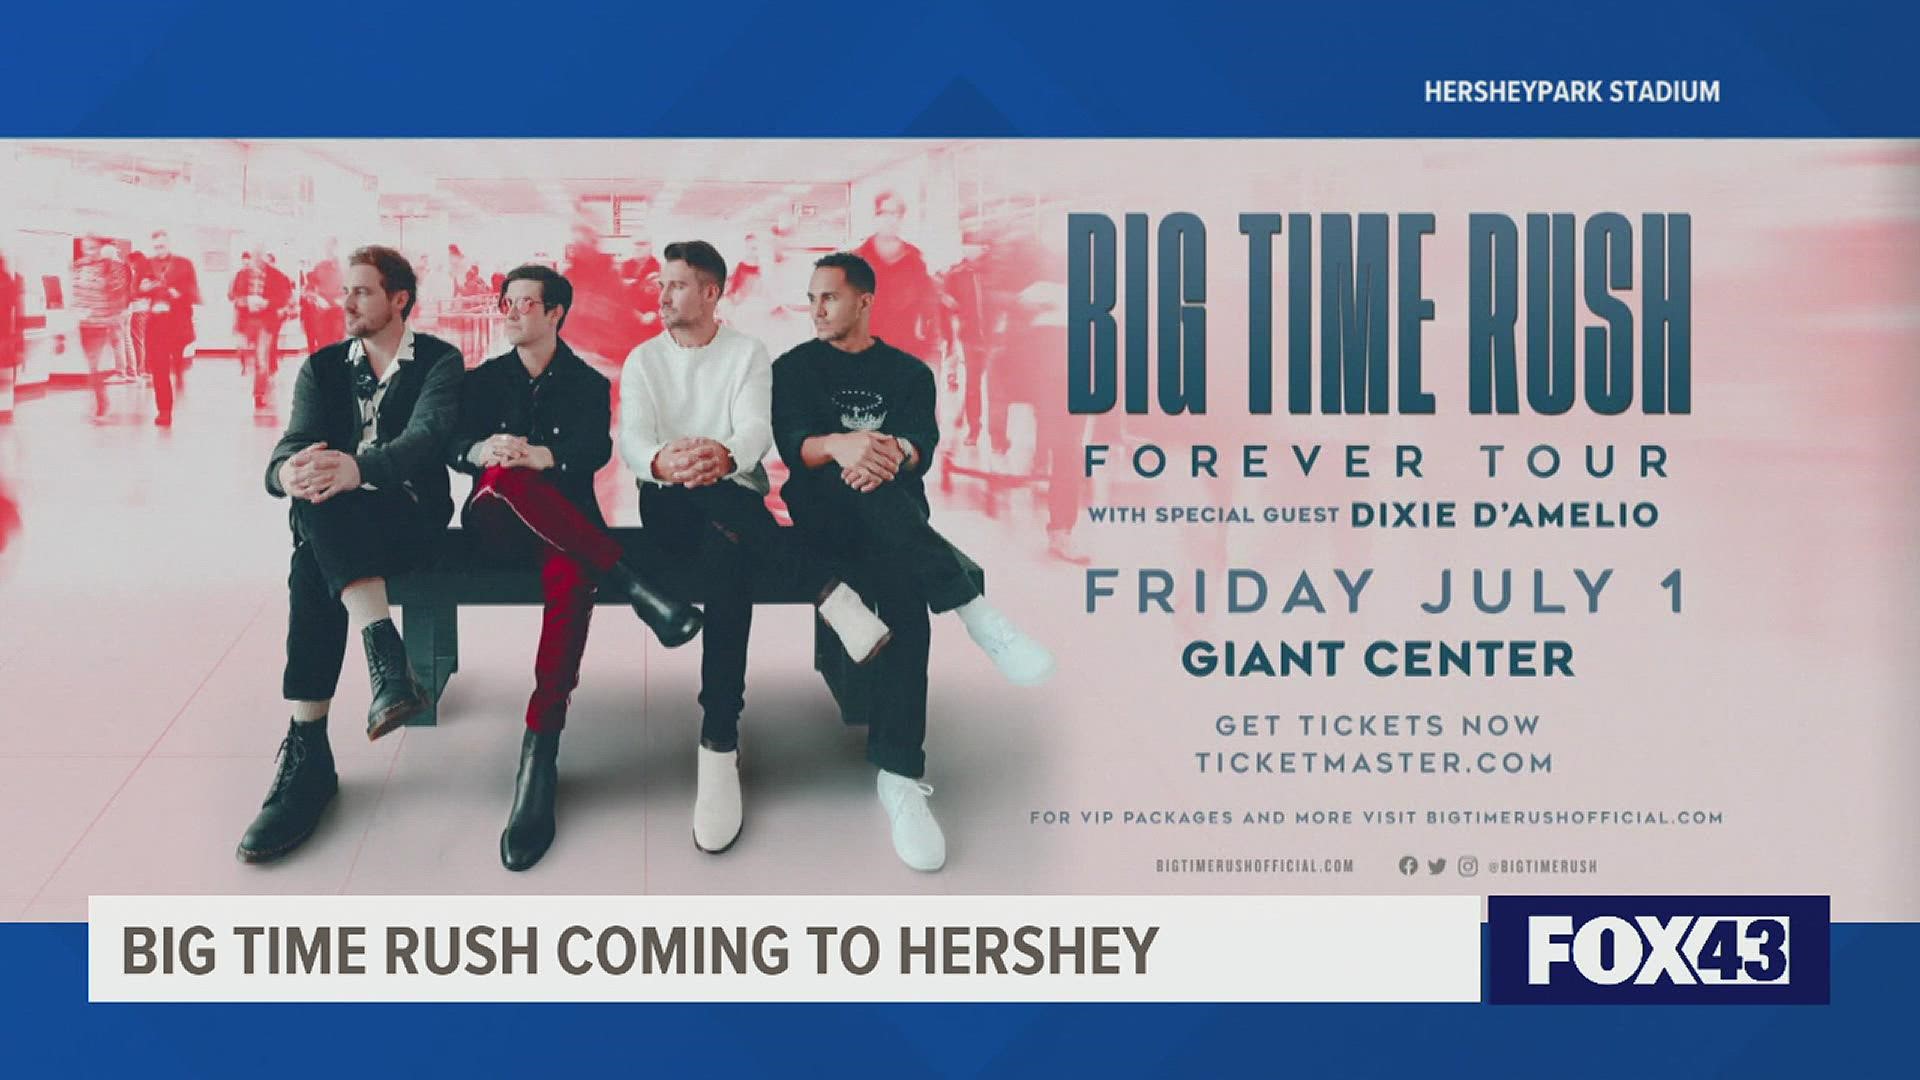 The boy band will visit Hershey on July 1 at 8 p.m. on the “Forever Tour” with TikTok star Dixie D’Amelio.